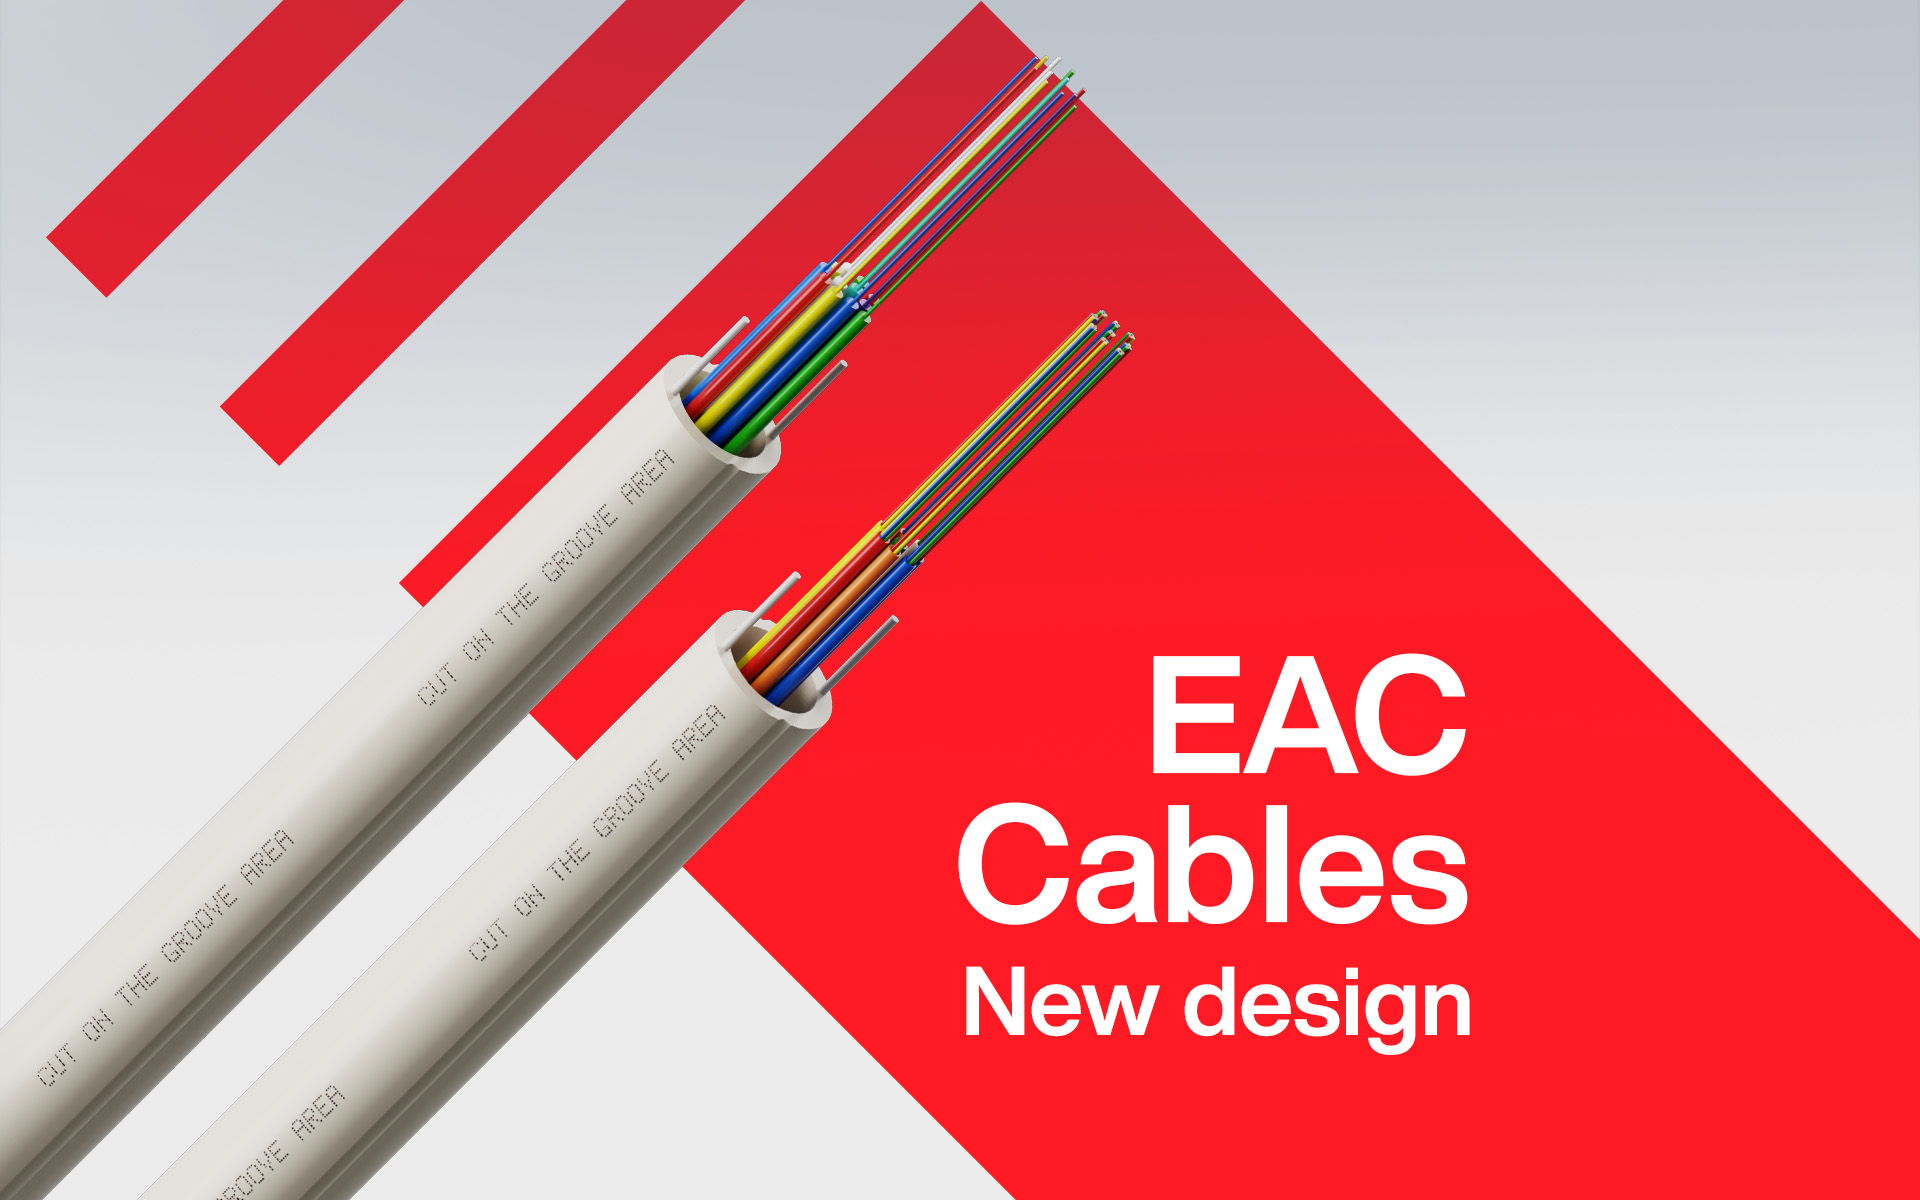 New design in EAC cable family!